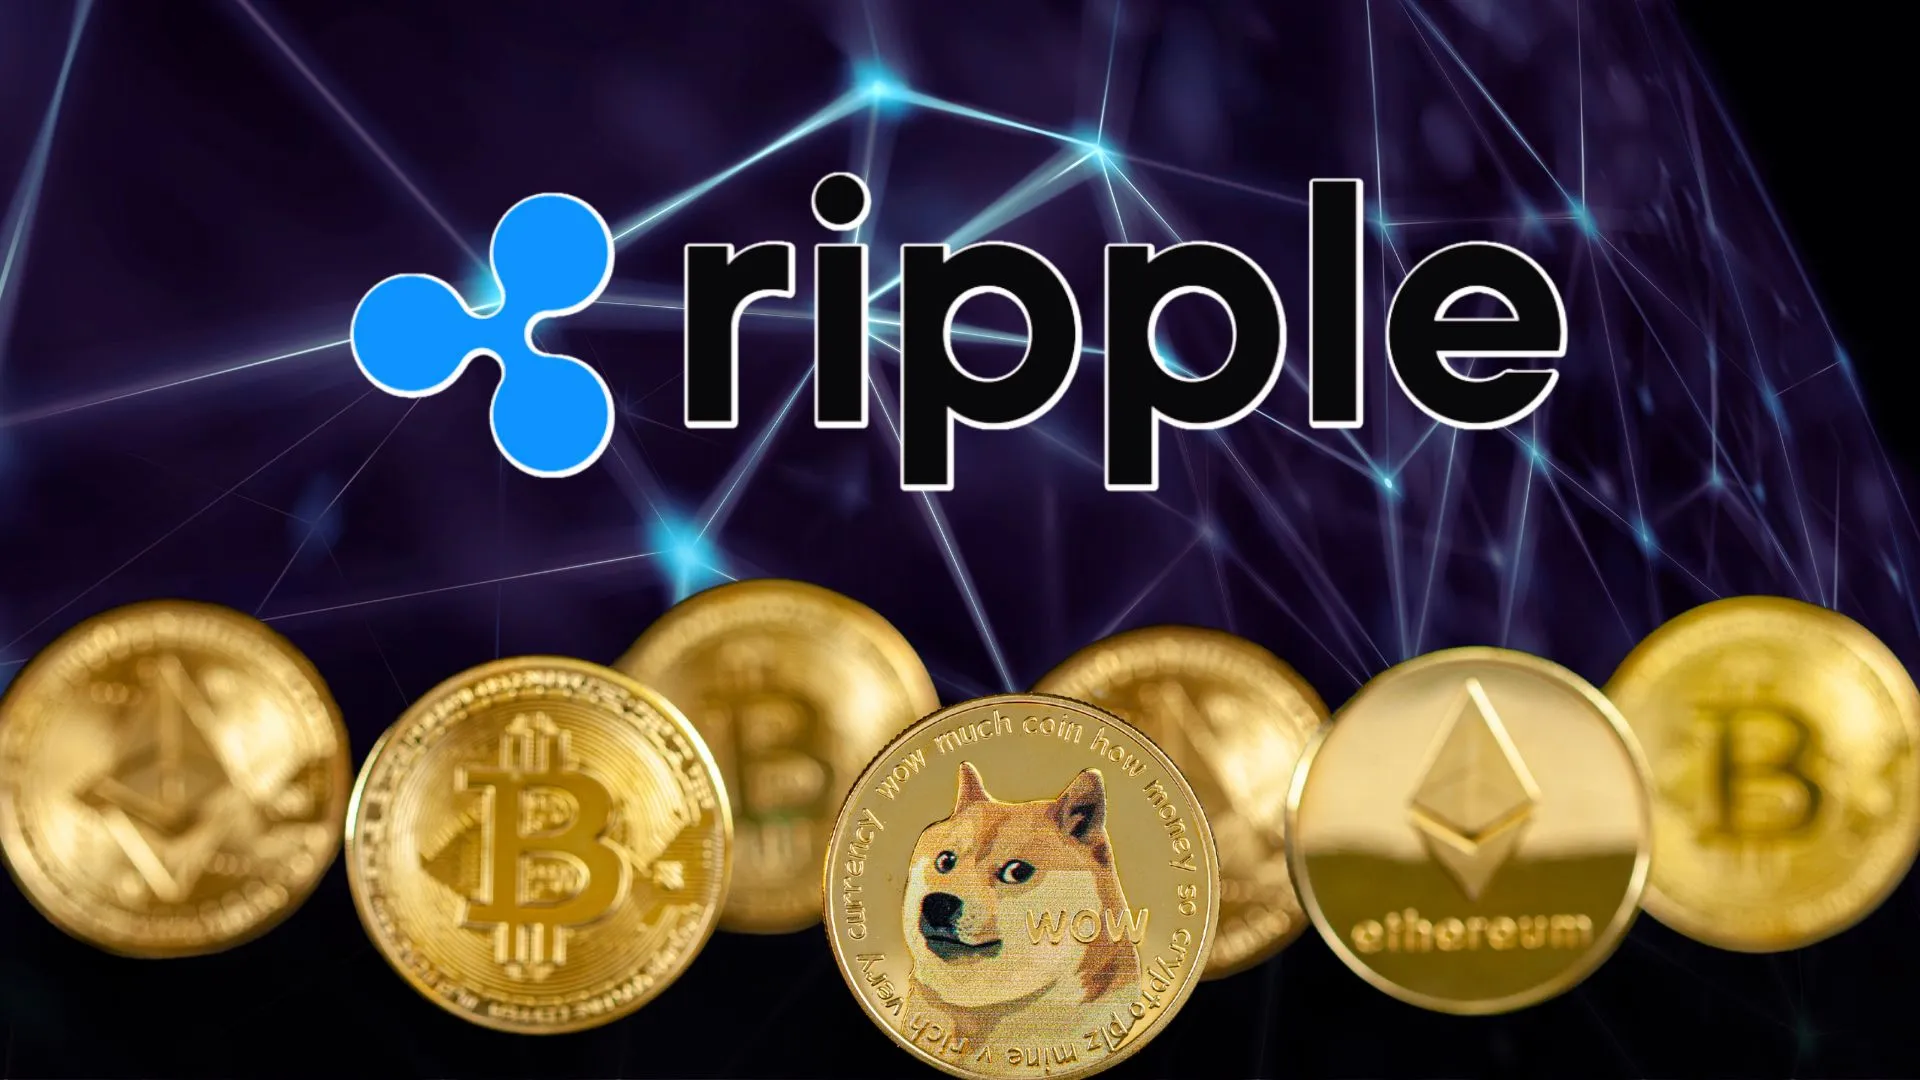 Five Typical Blockchain and Cryptocurrency Myths Busted by Ripple